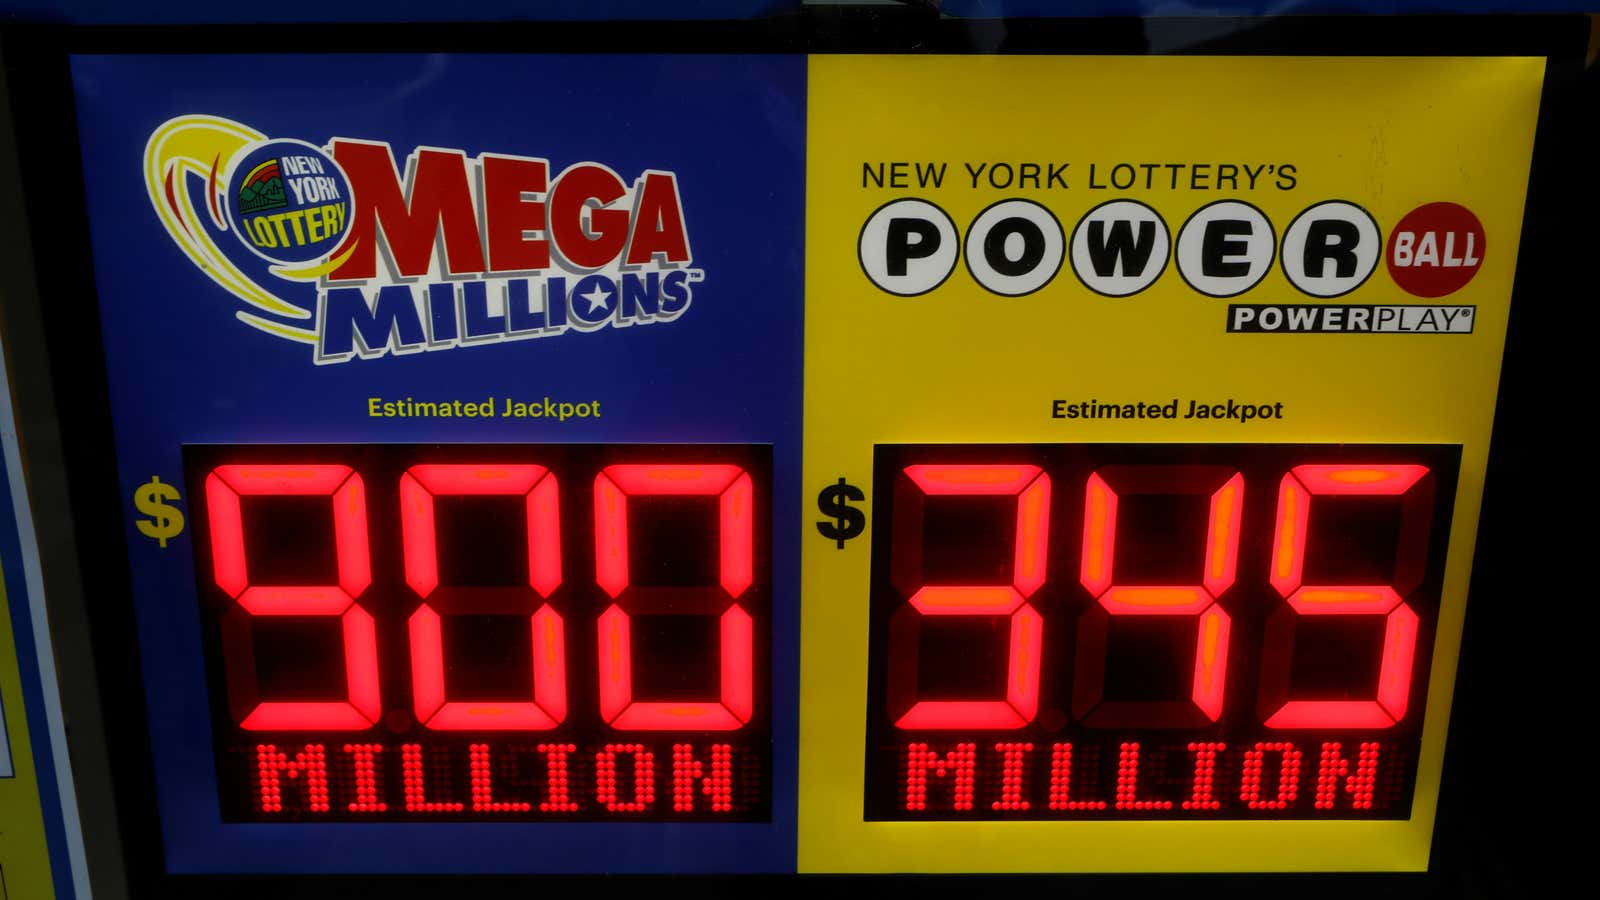 The lottery makers are hitting jackpot.